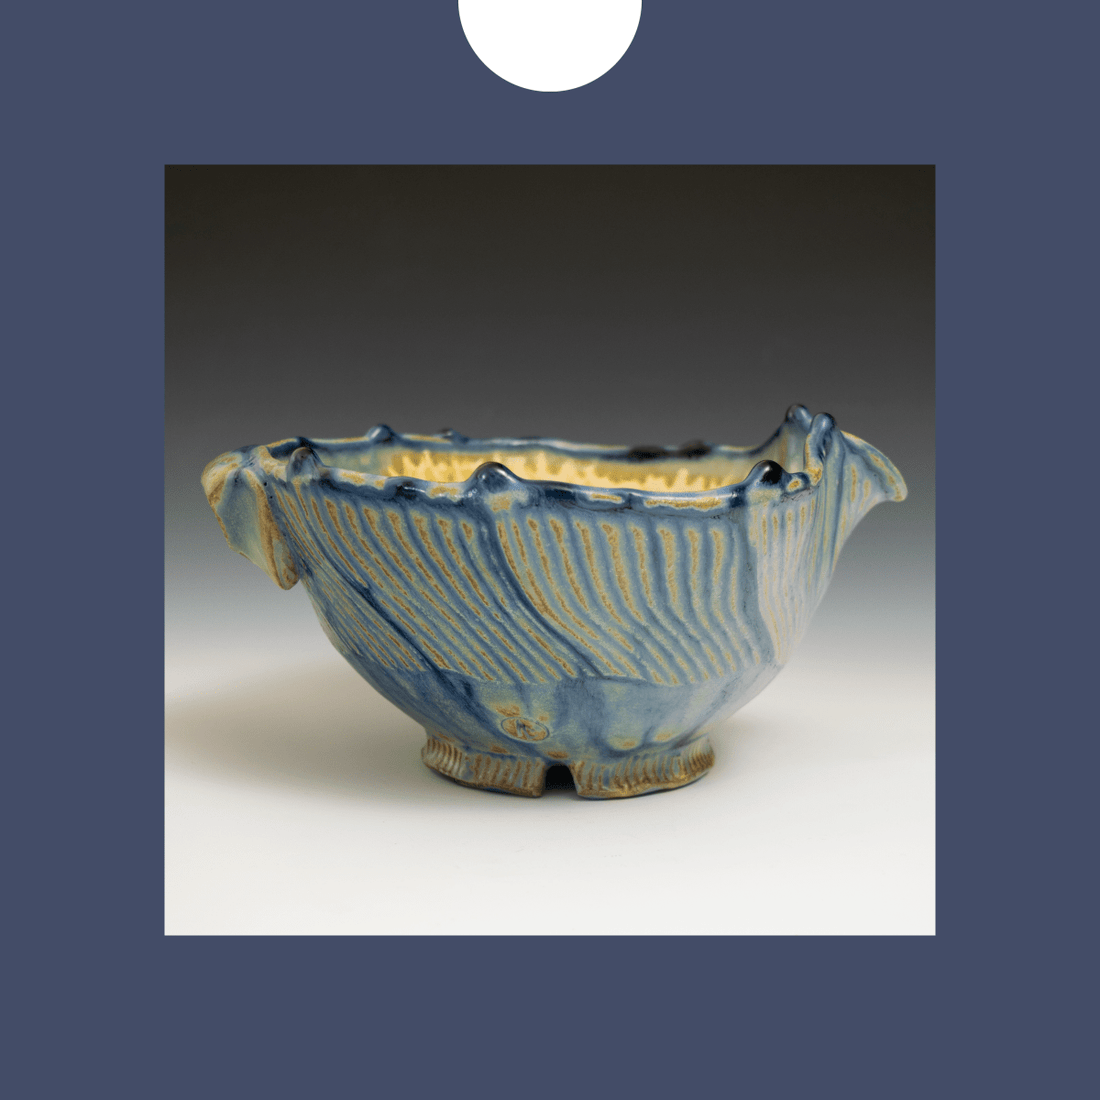  Andrew Linderman Pottery - American Craft Council